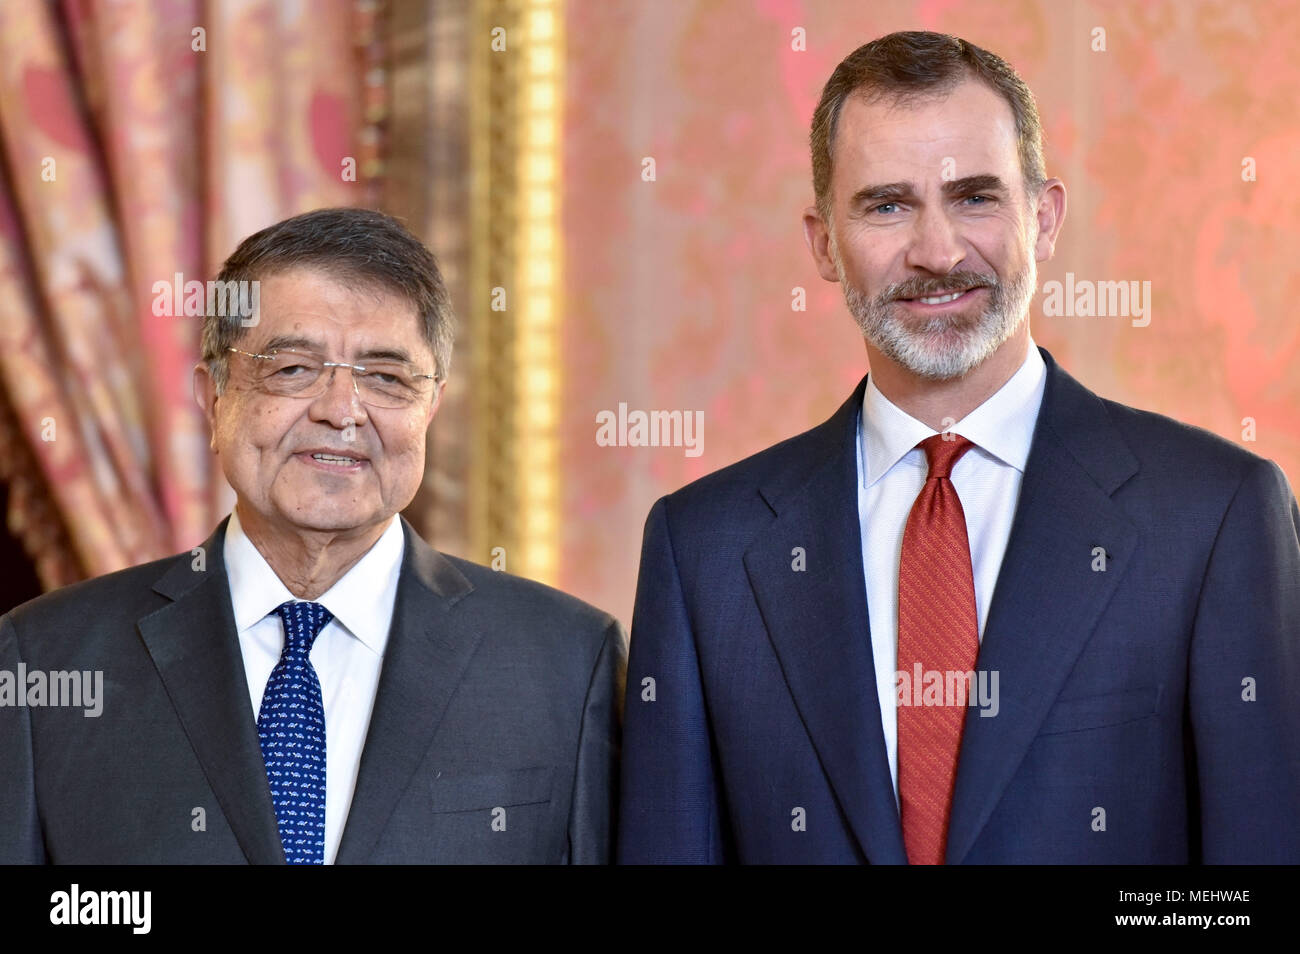 Sergio Ramirez and King Felipe VI. from Spain at the reception to the official lunch on the occasion of the award of the Spanish literary prize Premio Miguel de Cervantes in the Palacio Real. Madrid, 20.04.2018 | usage worldwide Stock Photo